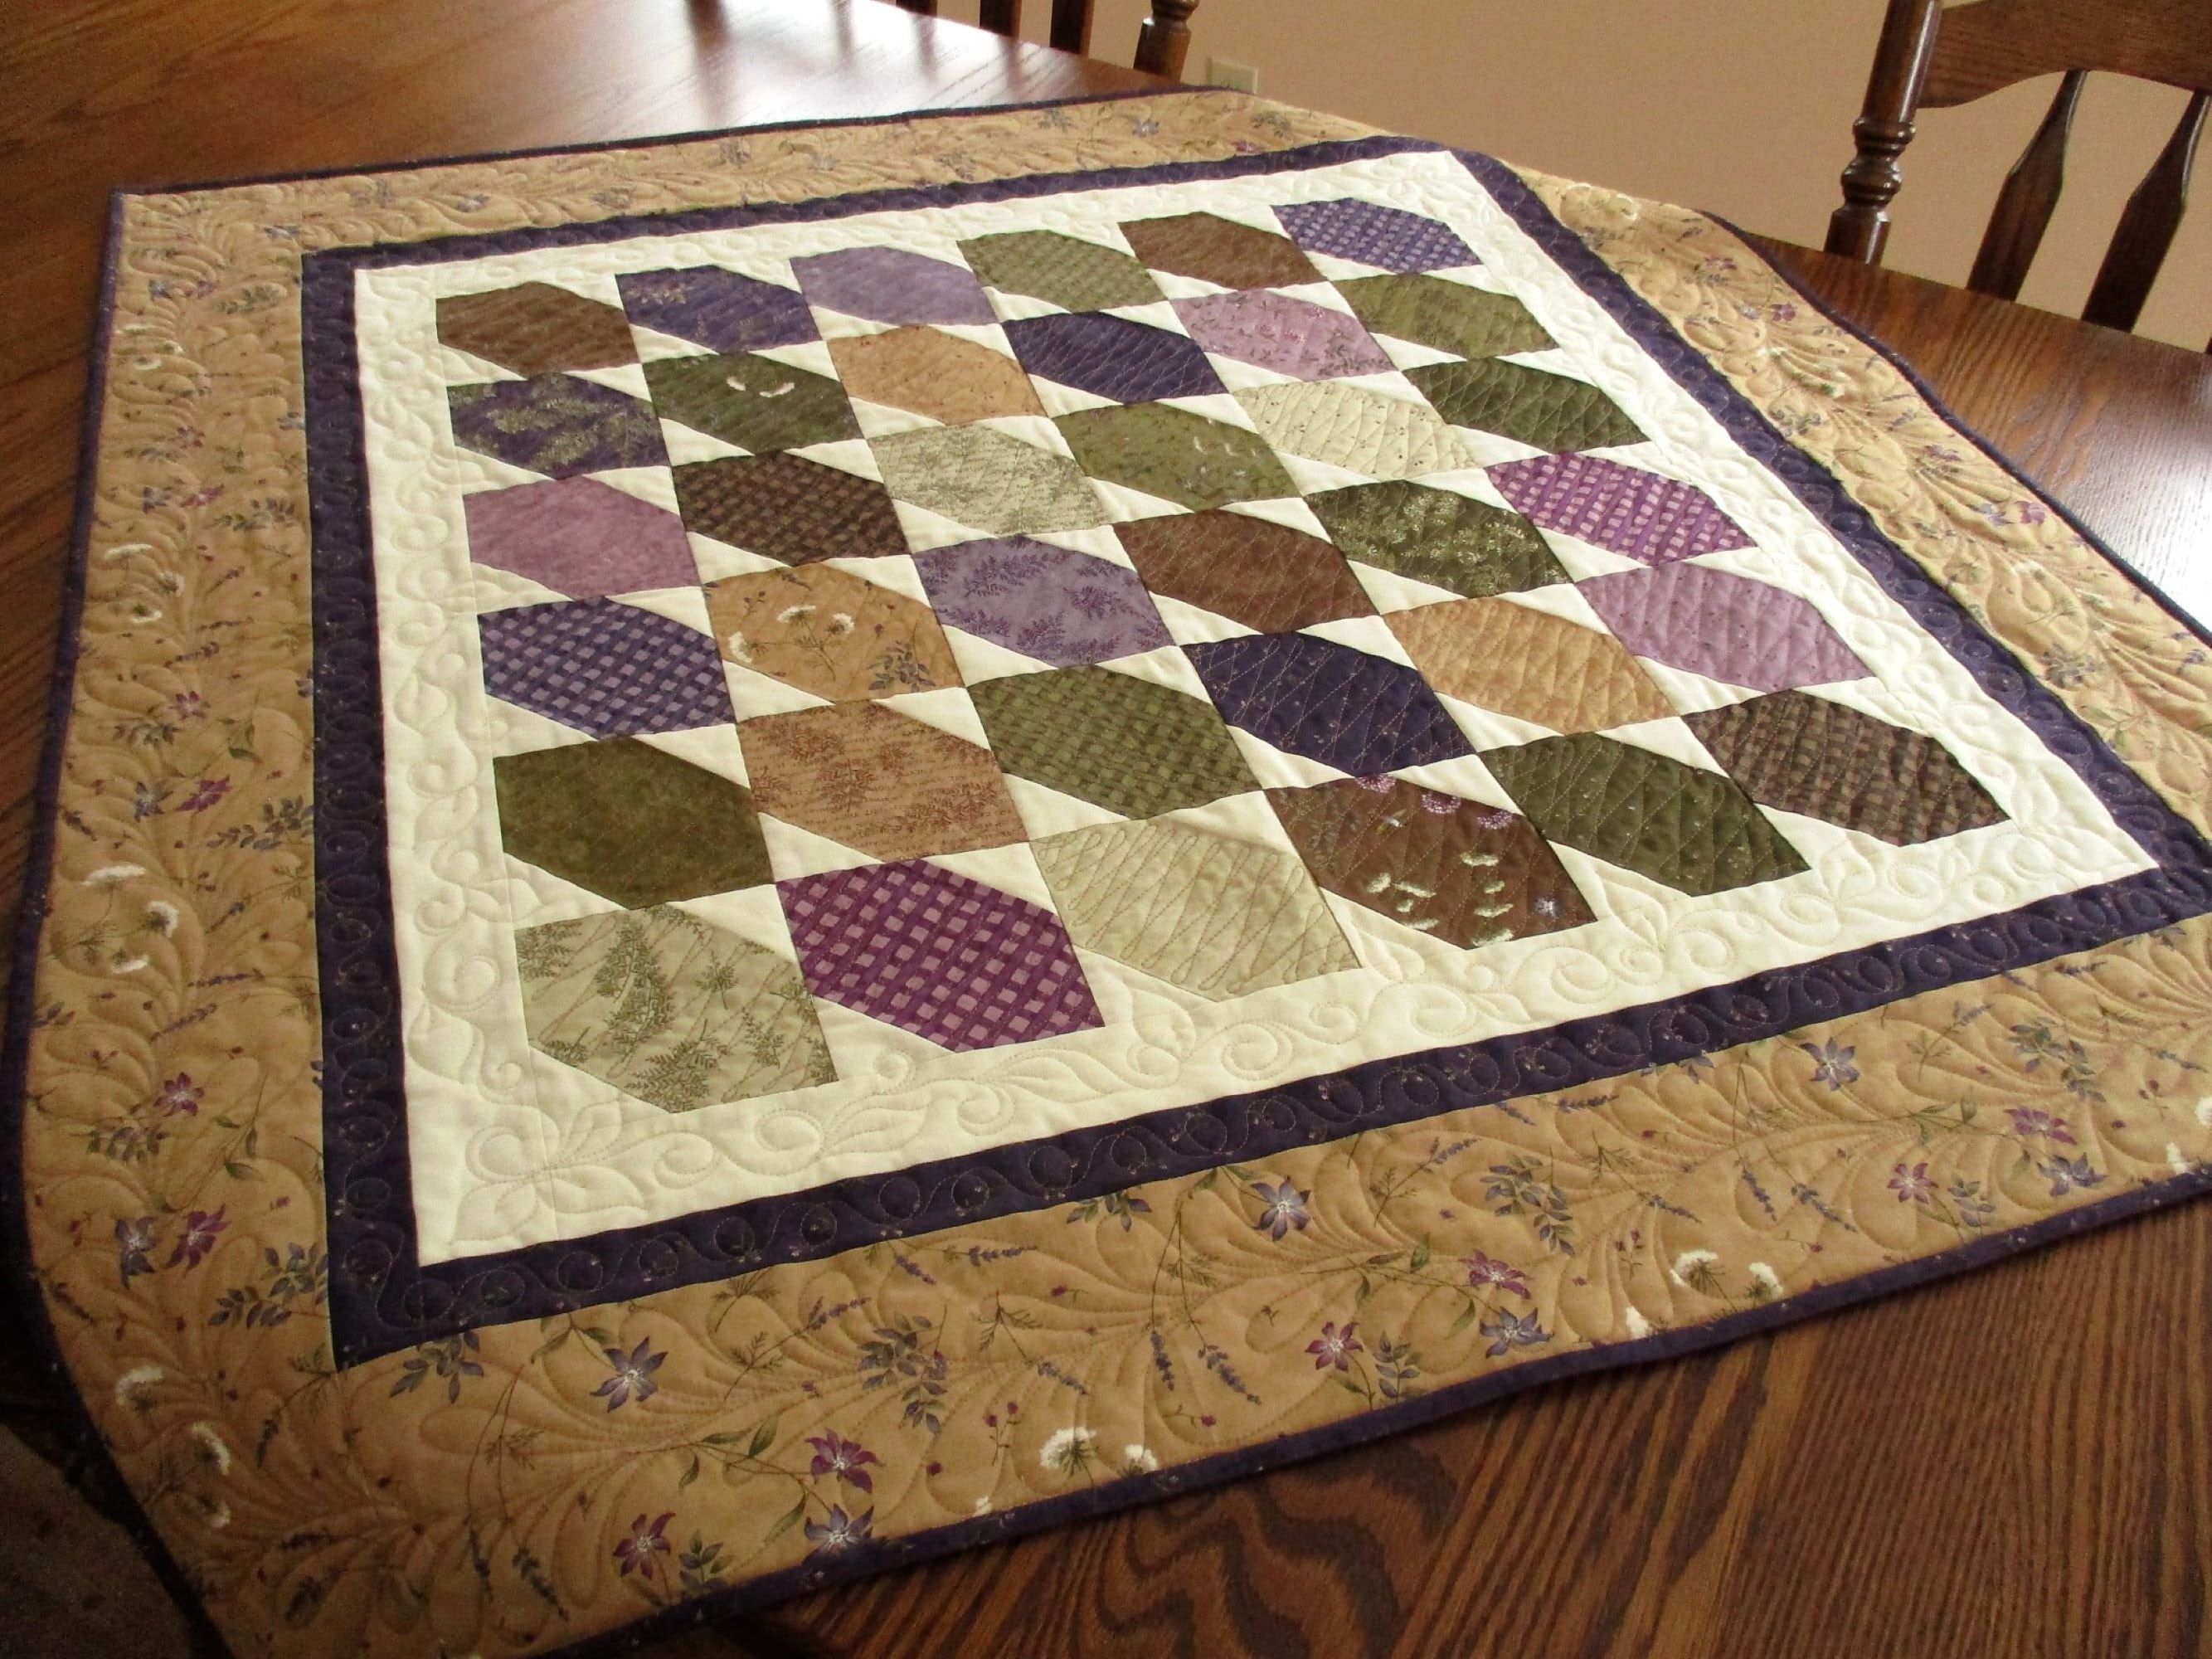 quilted table runner in rustic brown, purple and green